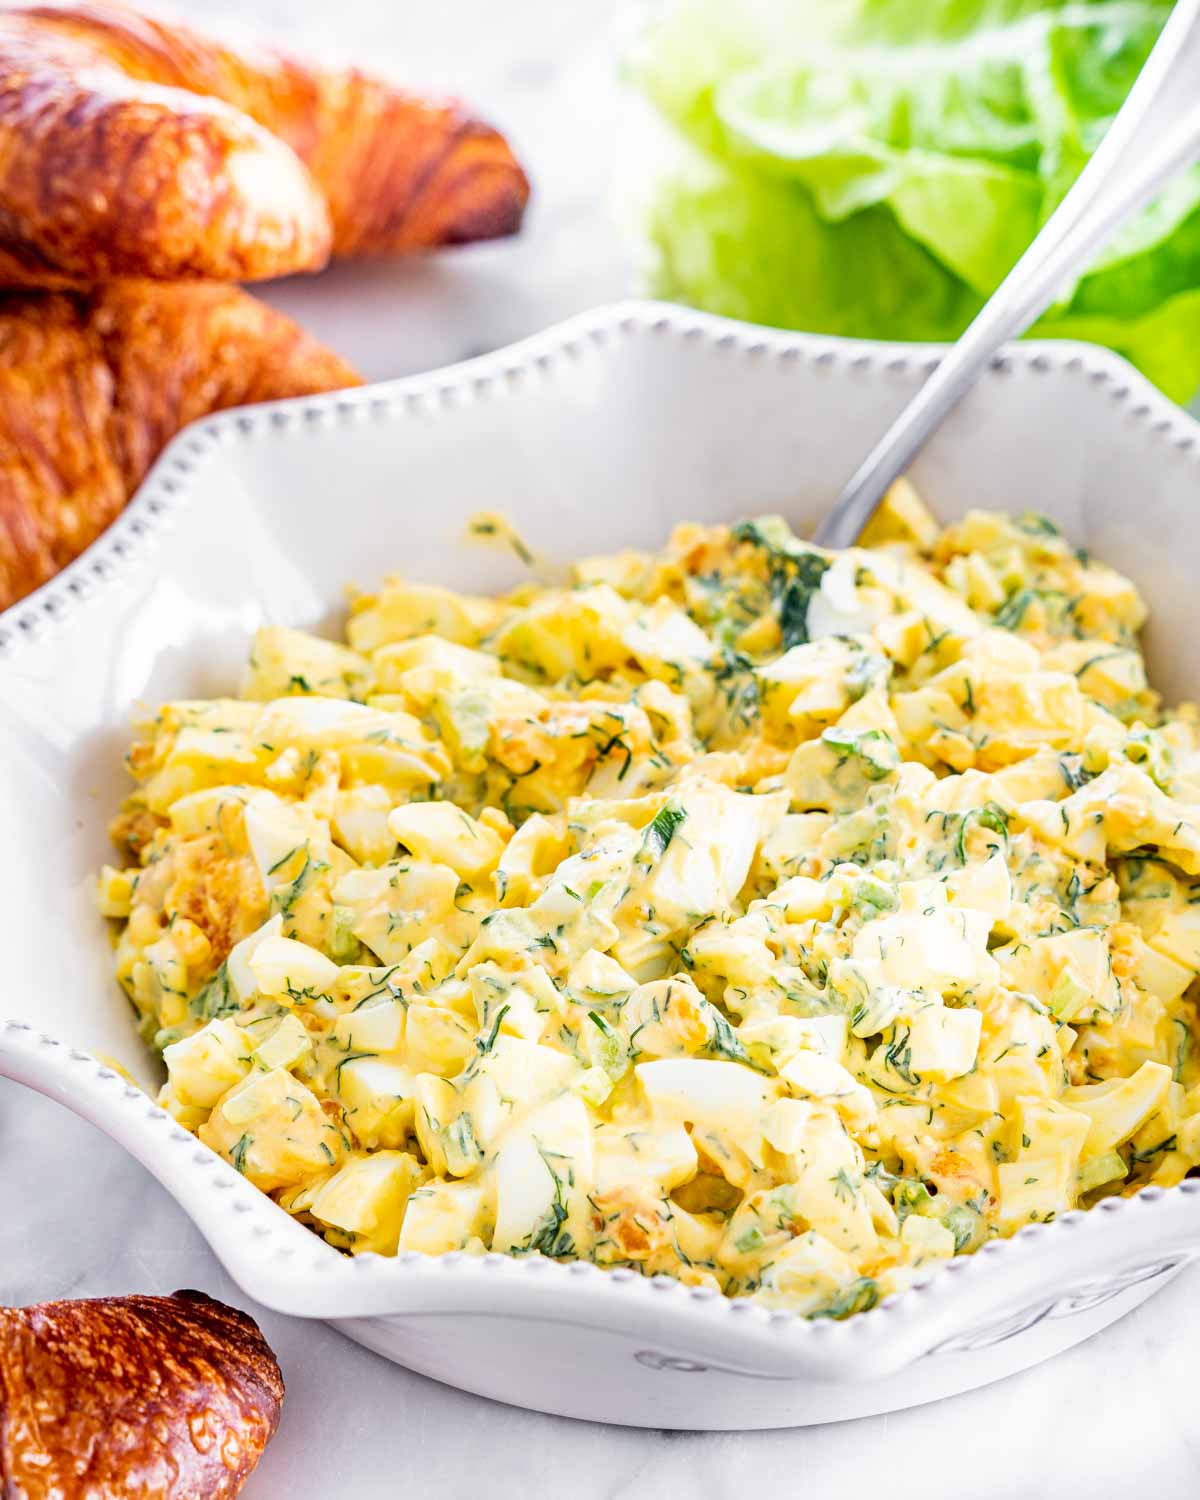 egg salad in a white bowl with croissants around it and lettuce